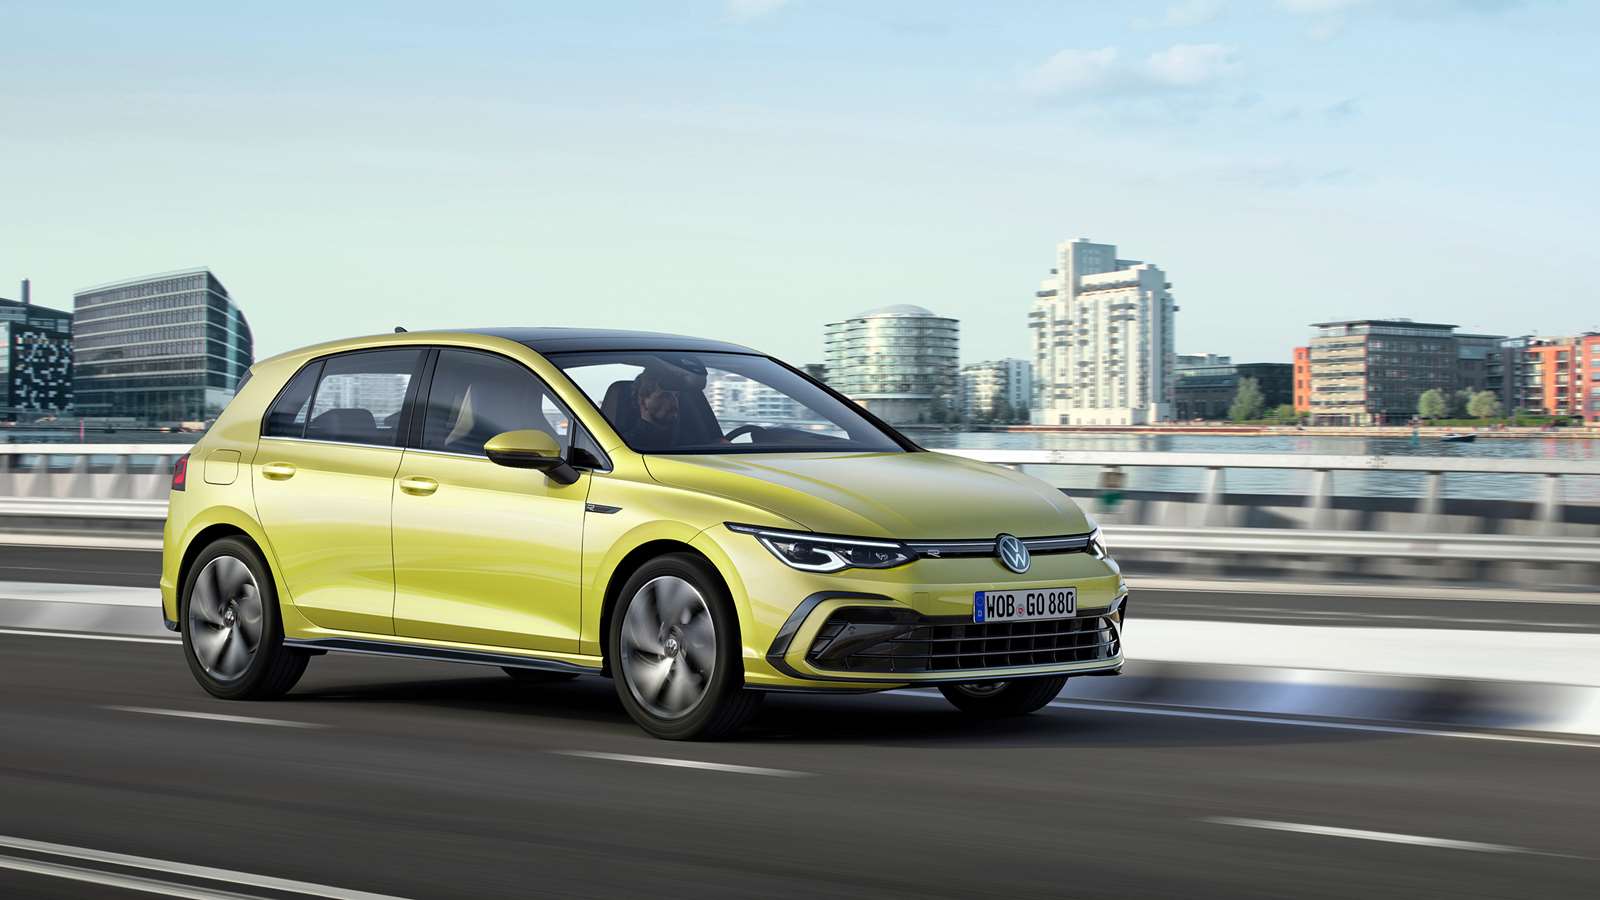 The new Volkswagen Golf – everything you need to know